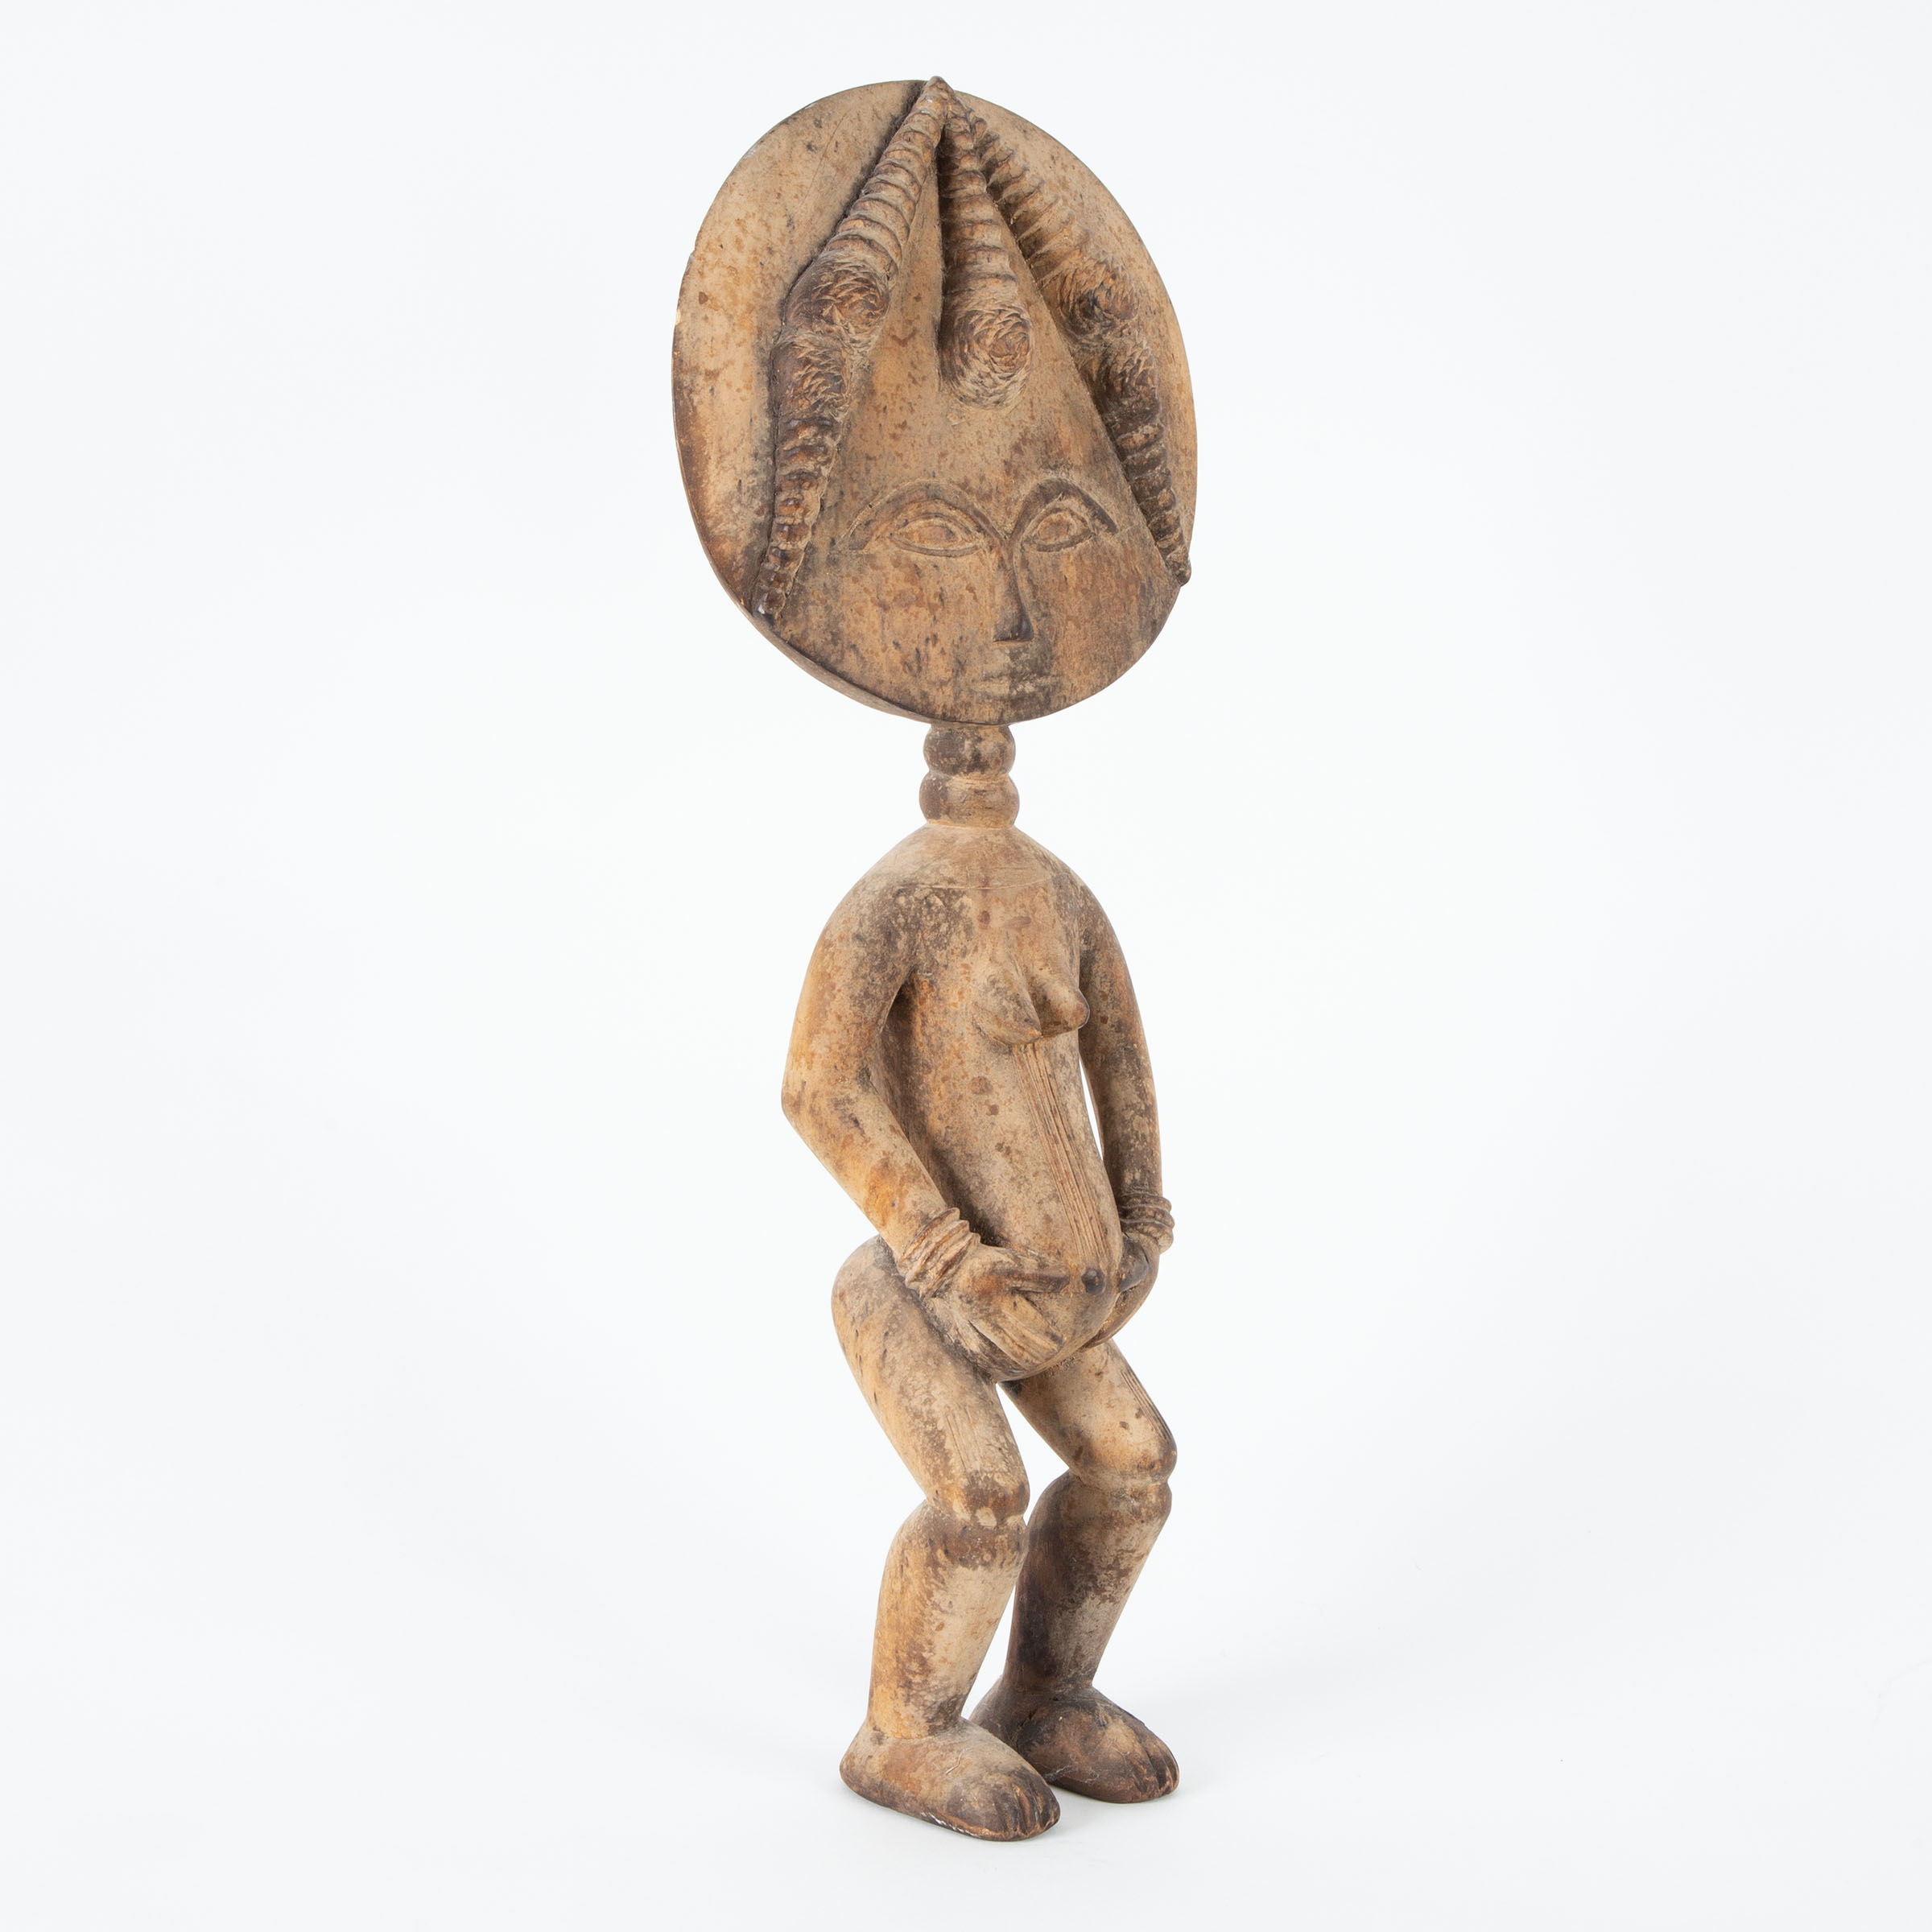 Ashanti Standing Maternity Figure, Ghana, West Africa, early to mid 20th century